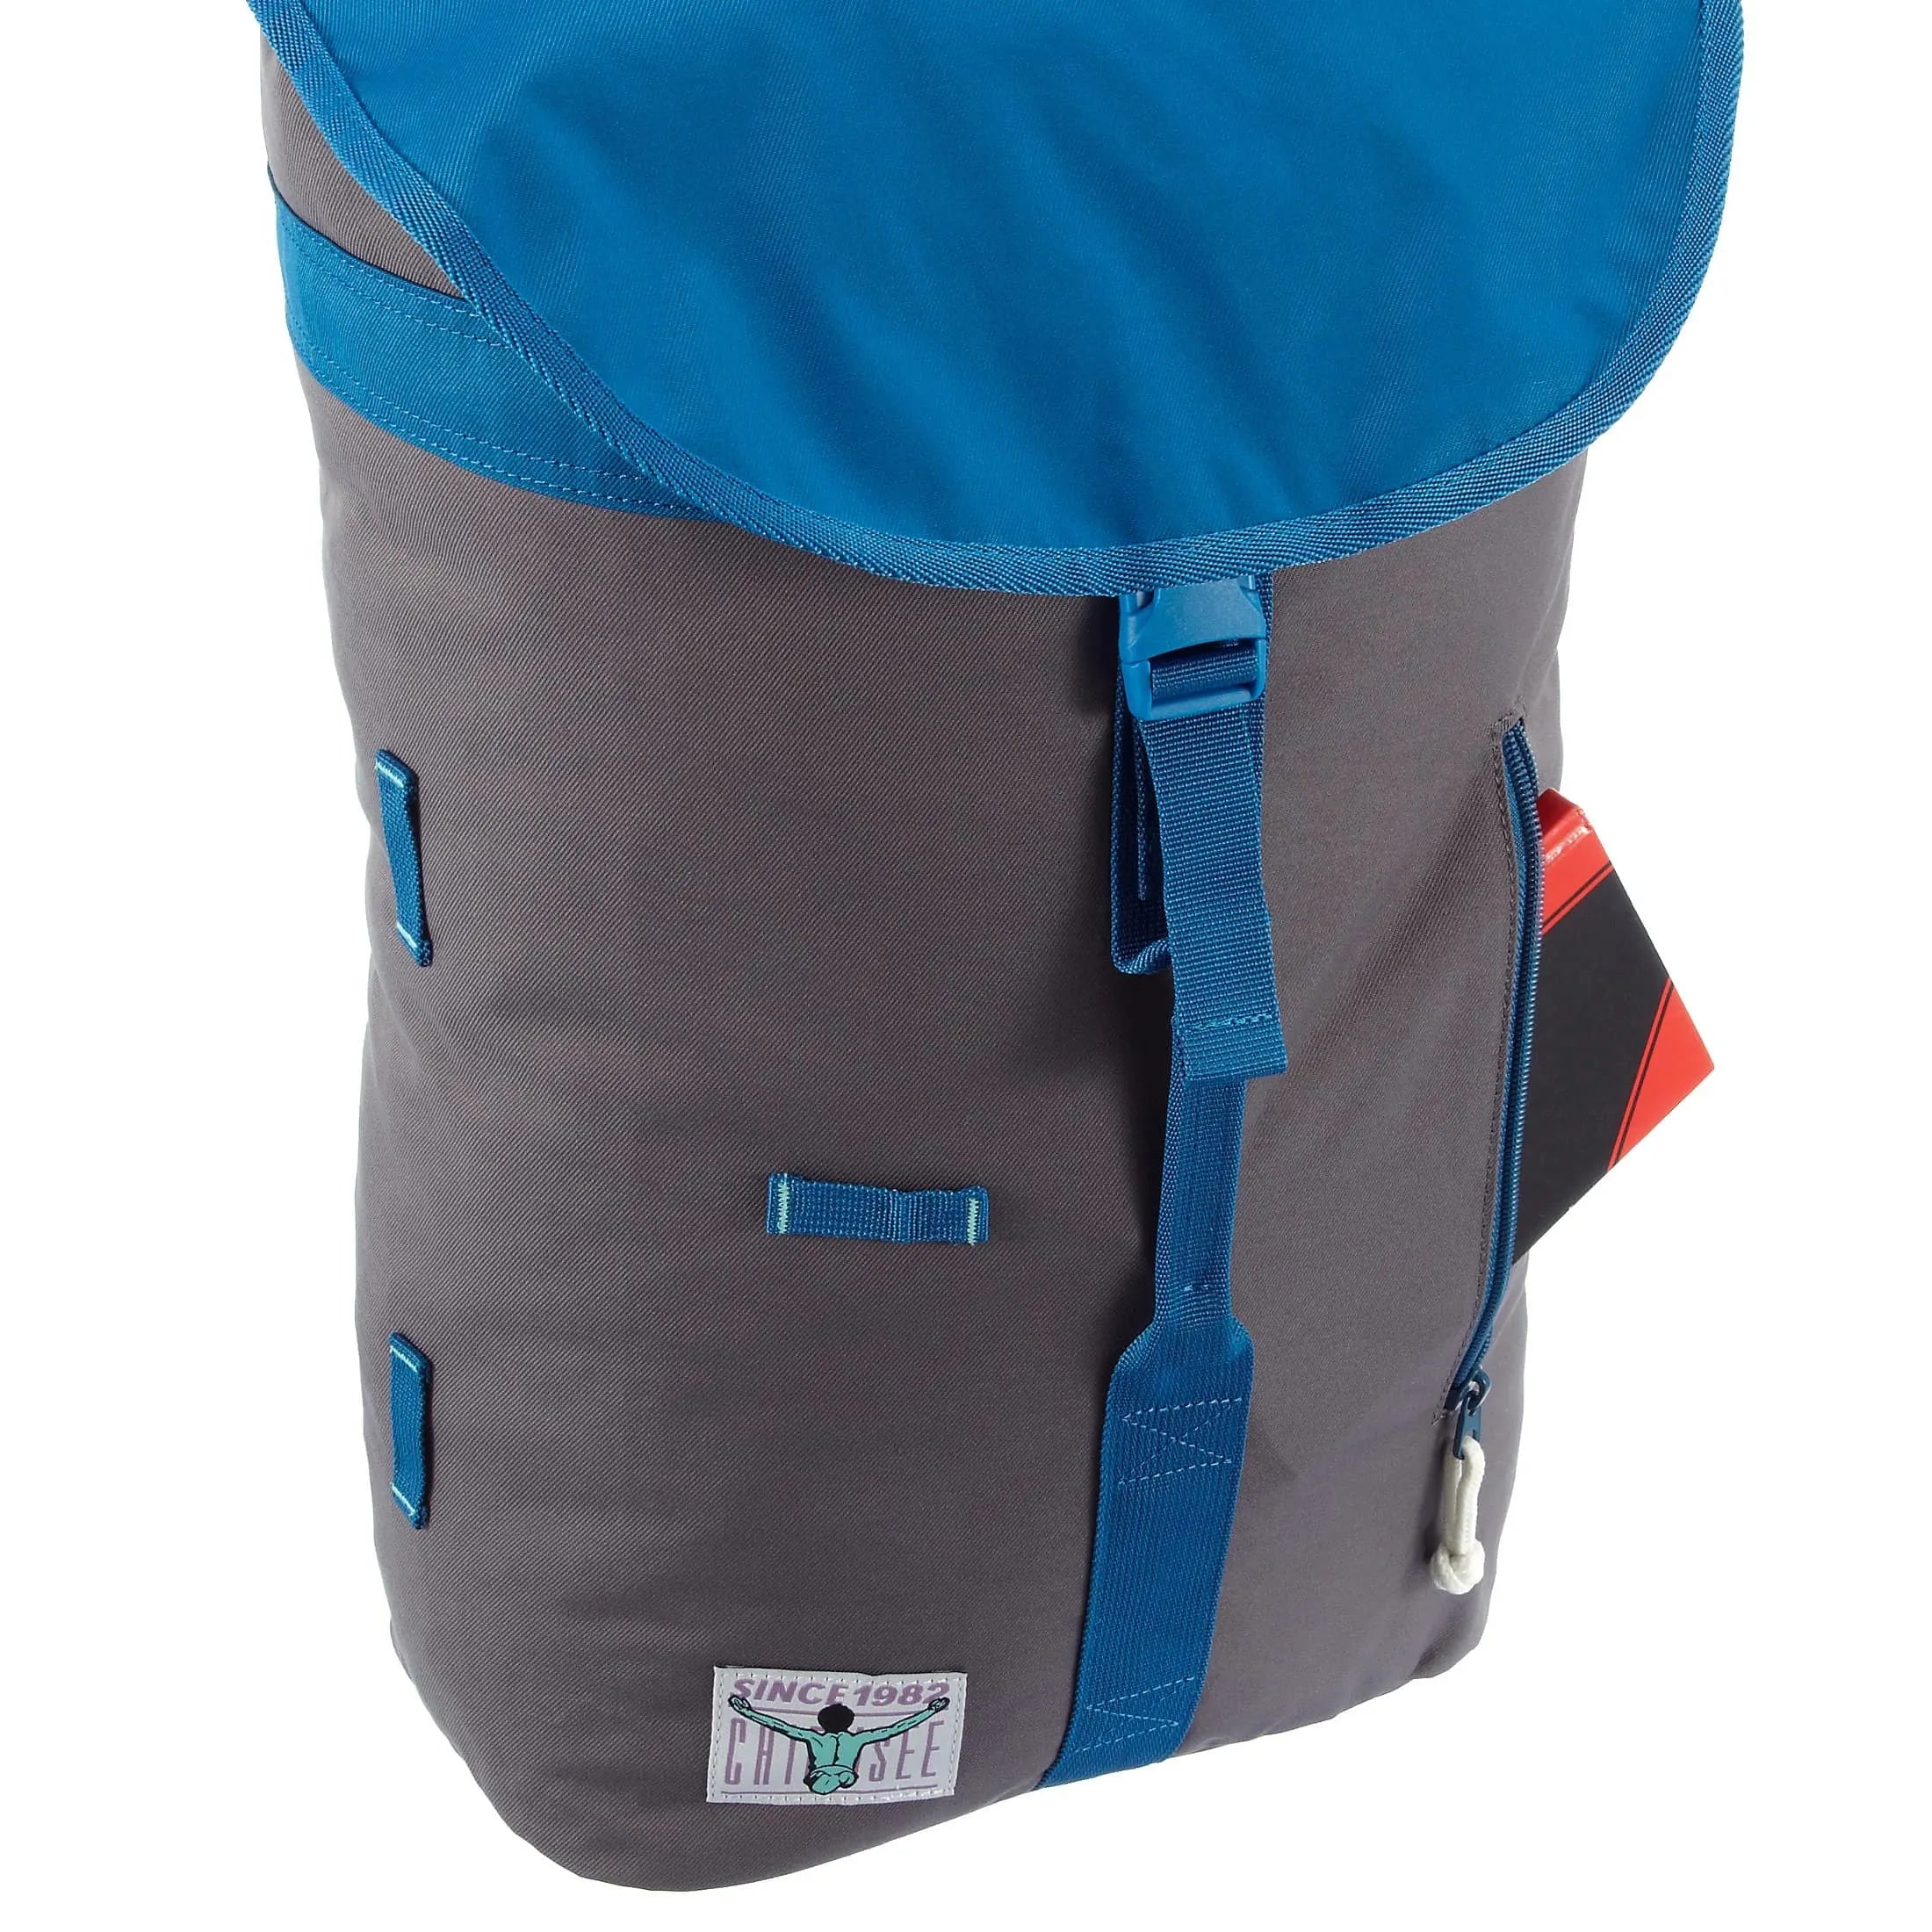 Chiemsee Urban Explorer Oslo backpack with laptop compartment 45 cm - bossa nova